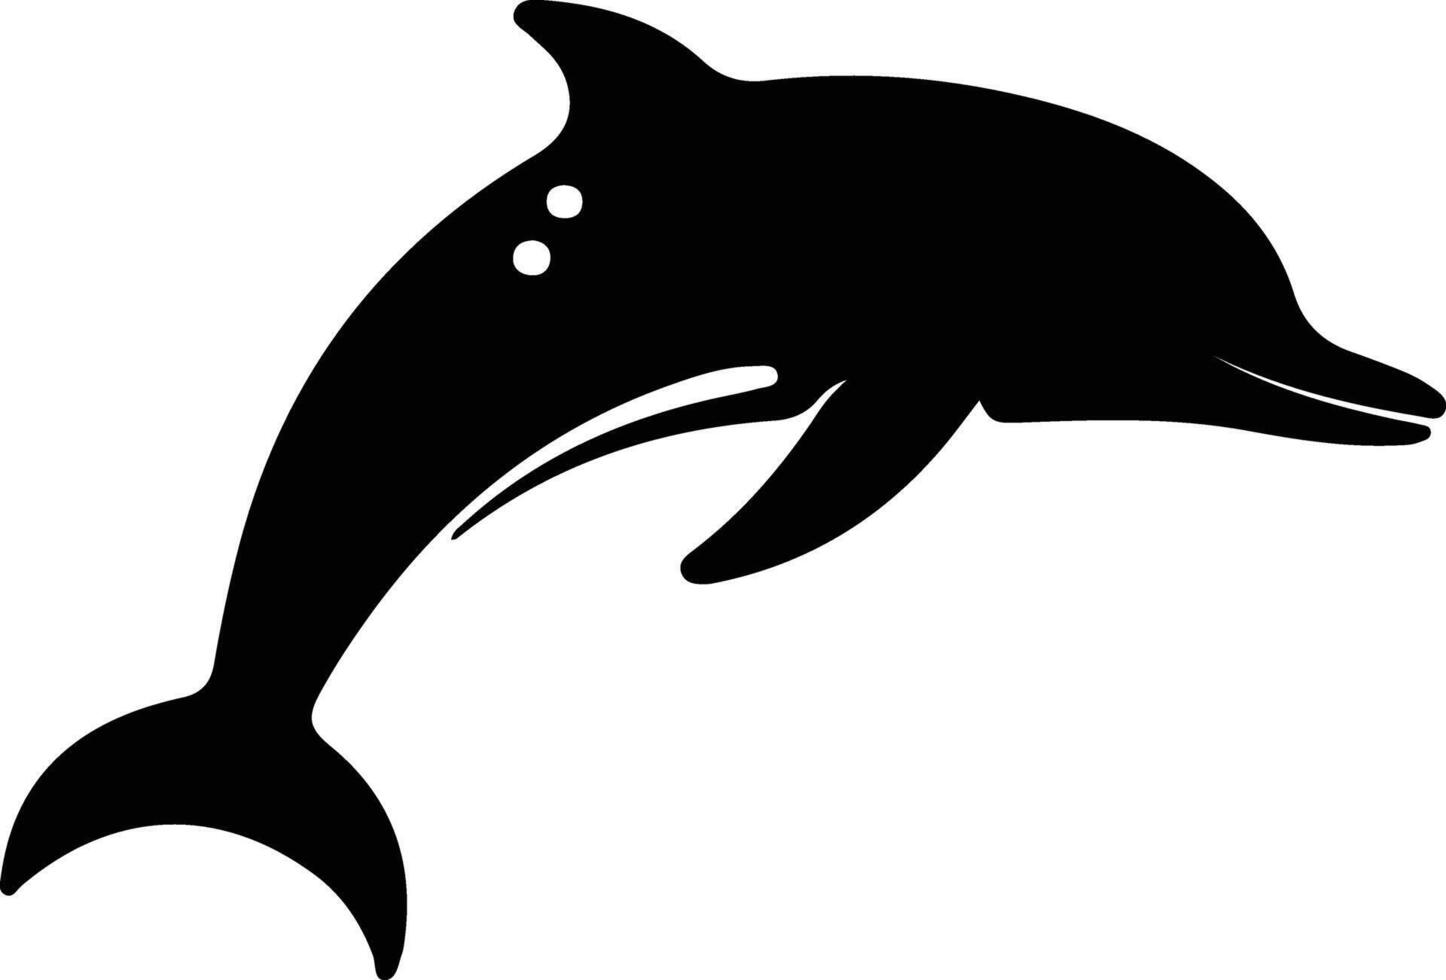 white-spotted dolphin  black silhouette vector